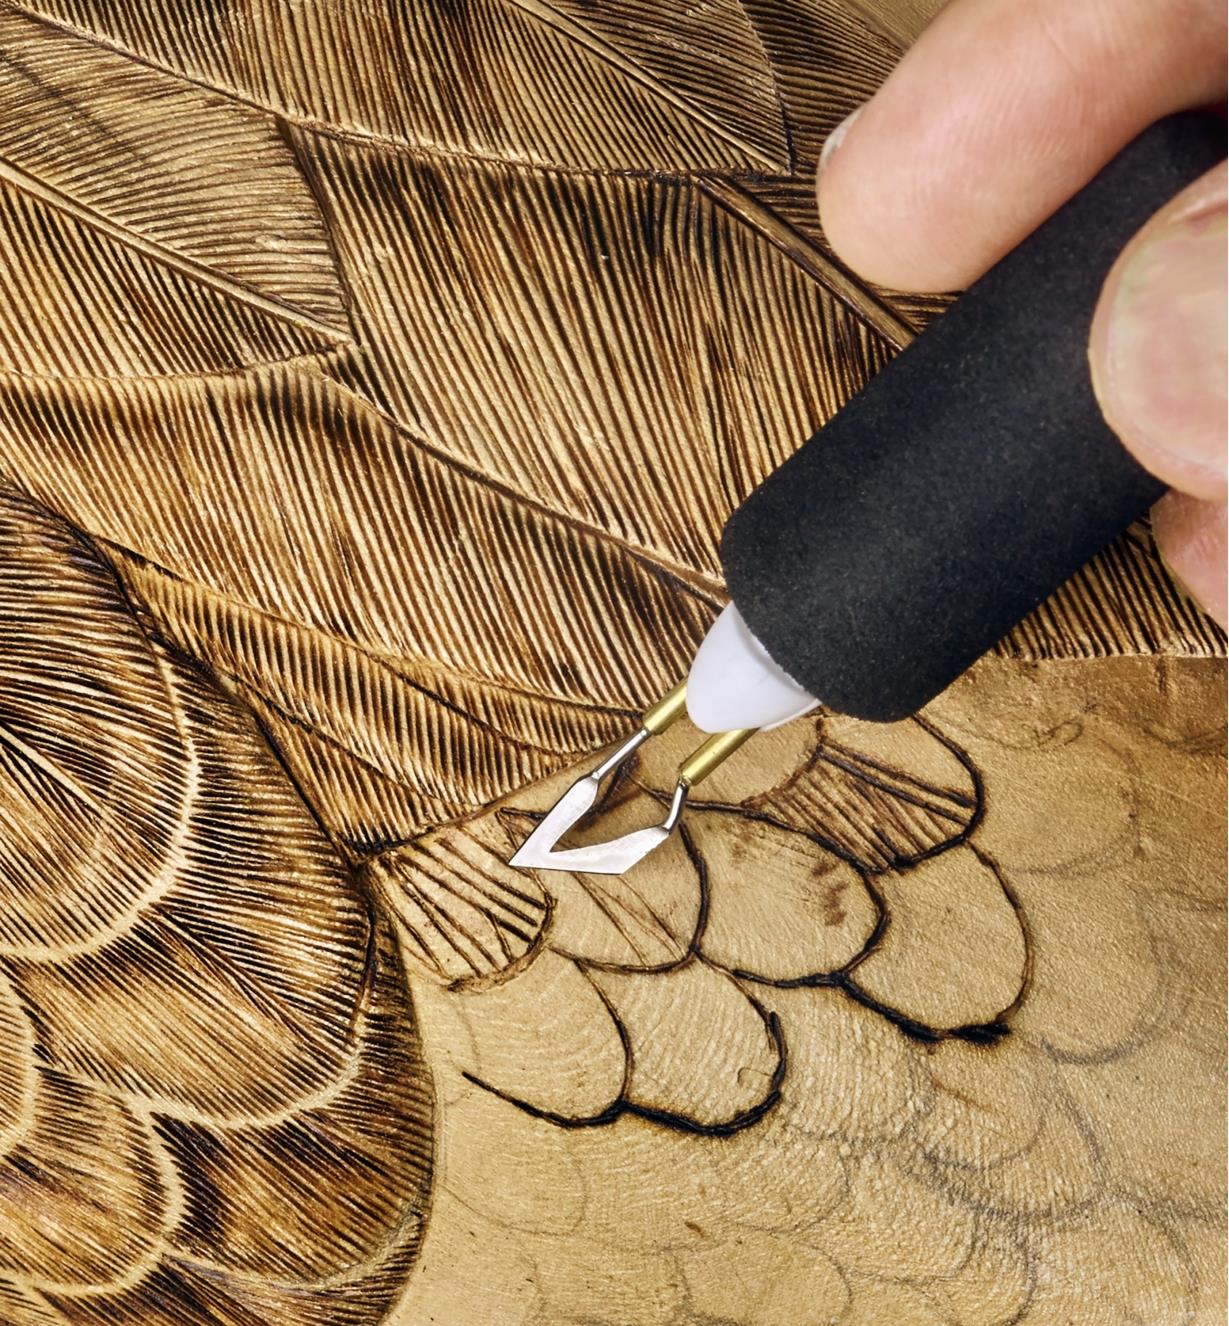 A woodworker uses the Razertip SK wood burning set to apply feather details to a bird carving